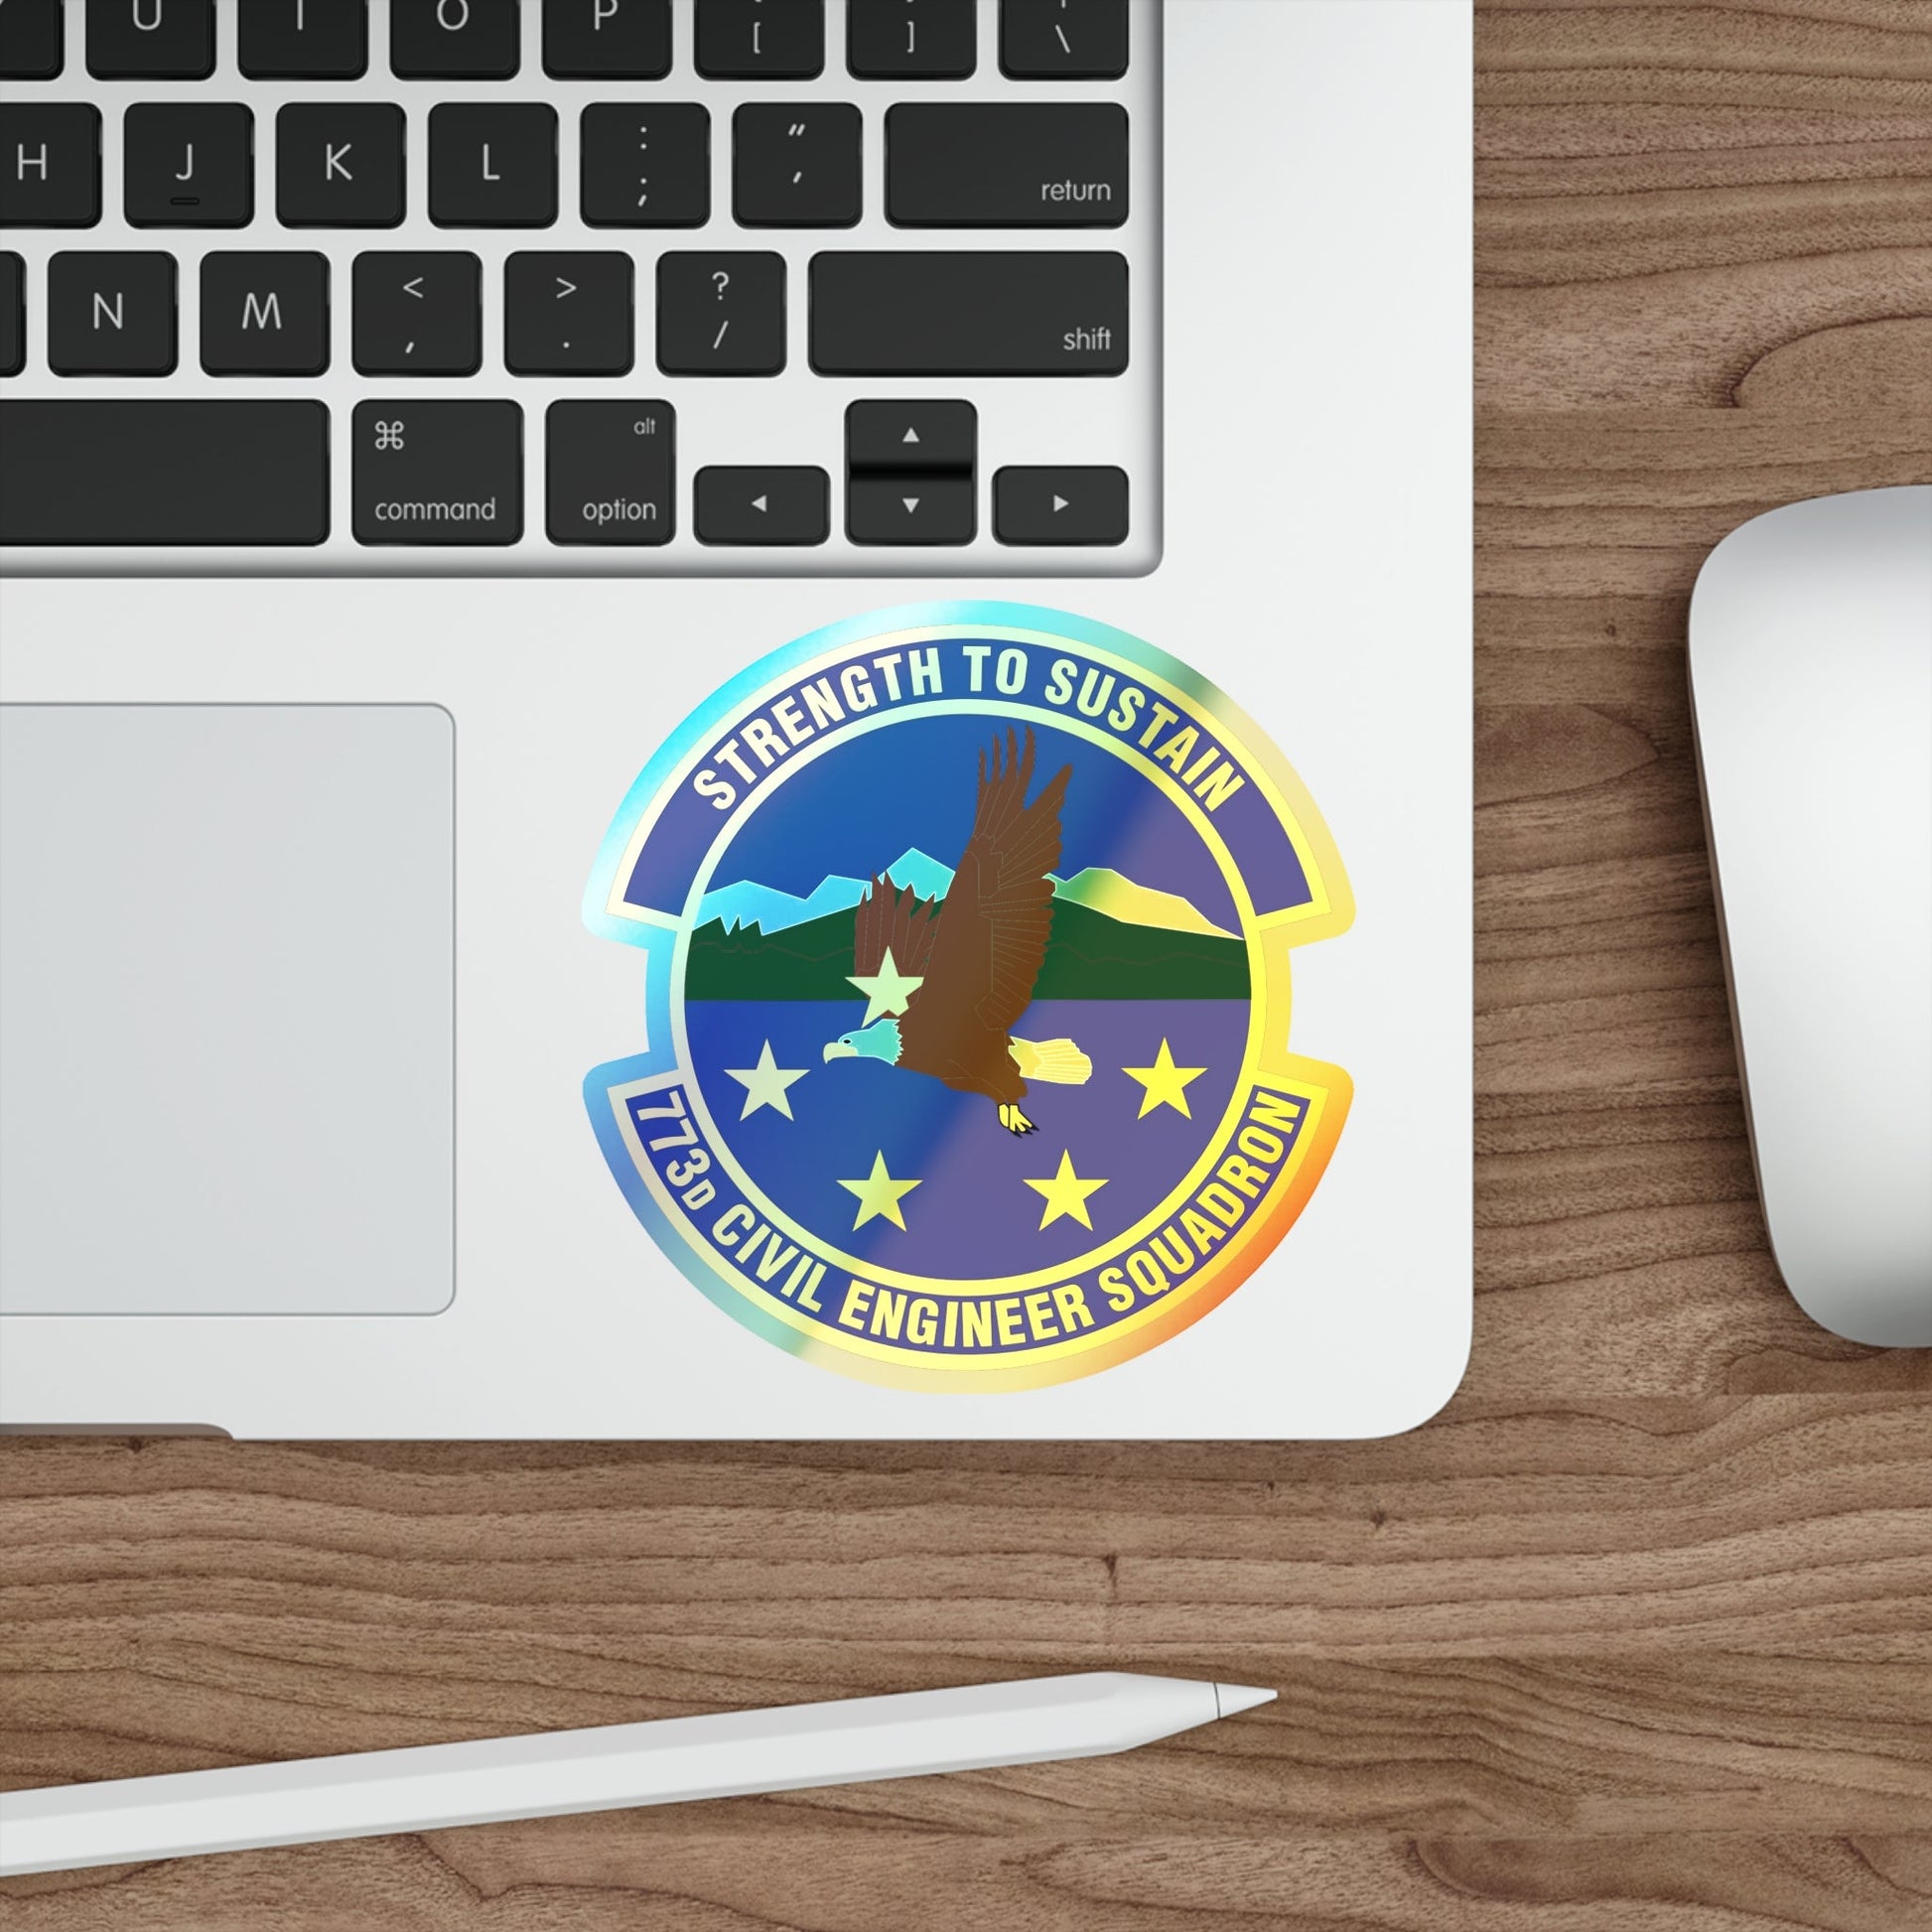 773 Civil Engineer Squadron PACAF (U.S. Air Force) Holographic STICKER Die-Cut Vinyl Decal-The Sticker Space